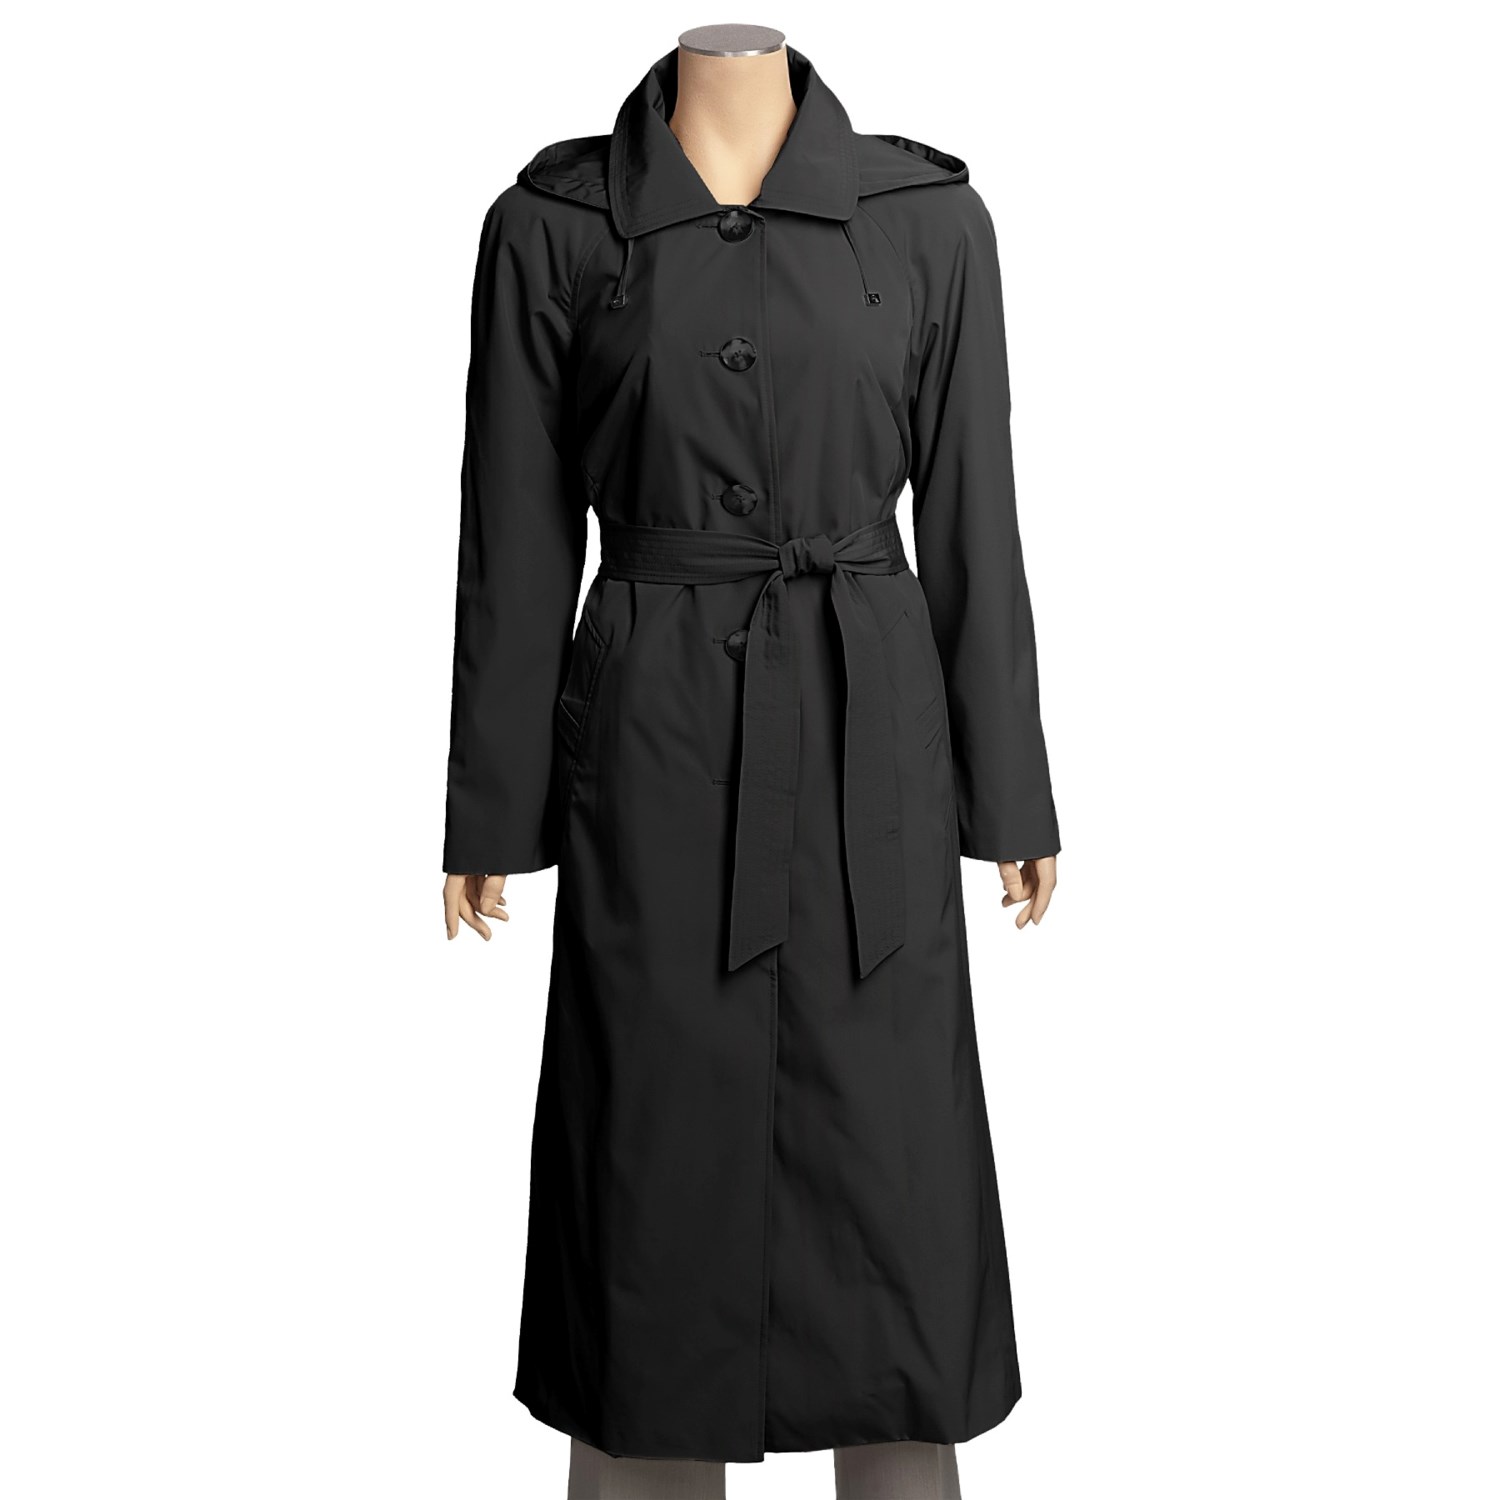 London Fog Single-Breasted Trench Coat (For Women) 3245K - Save 37%